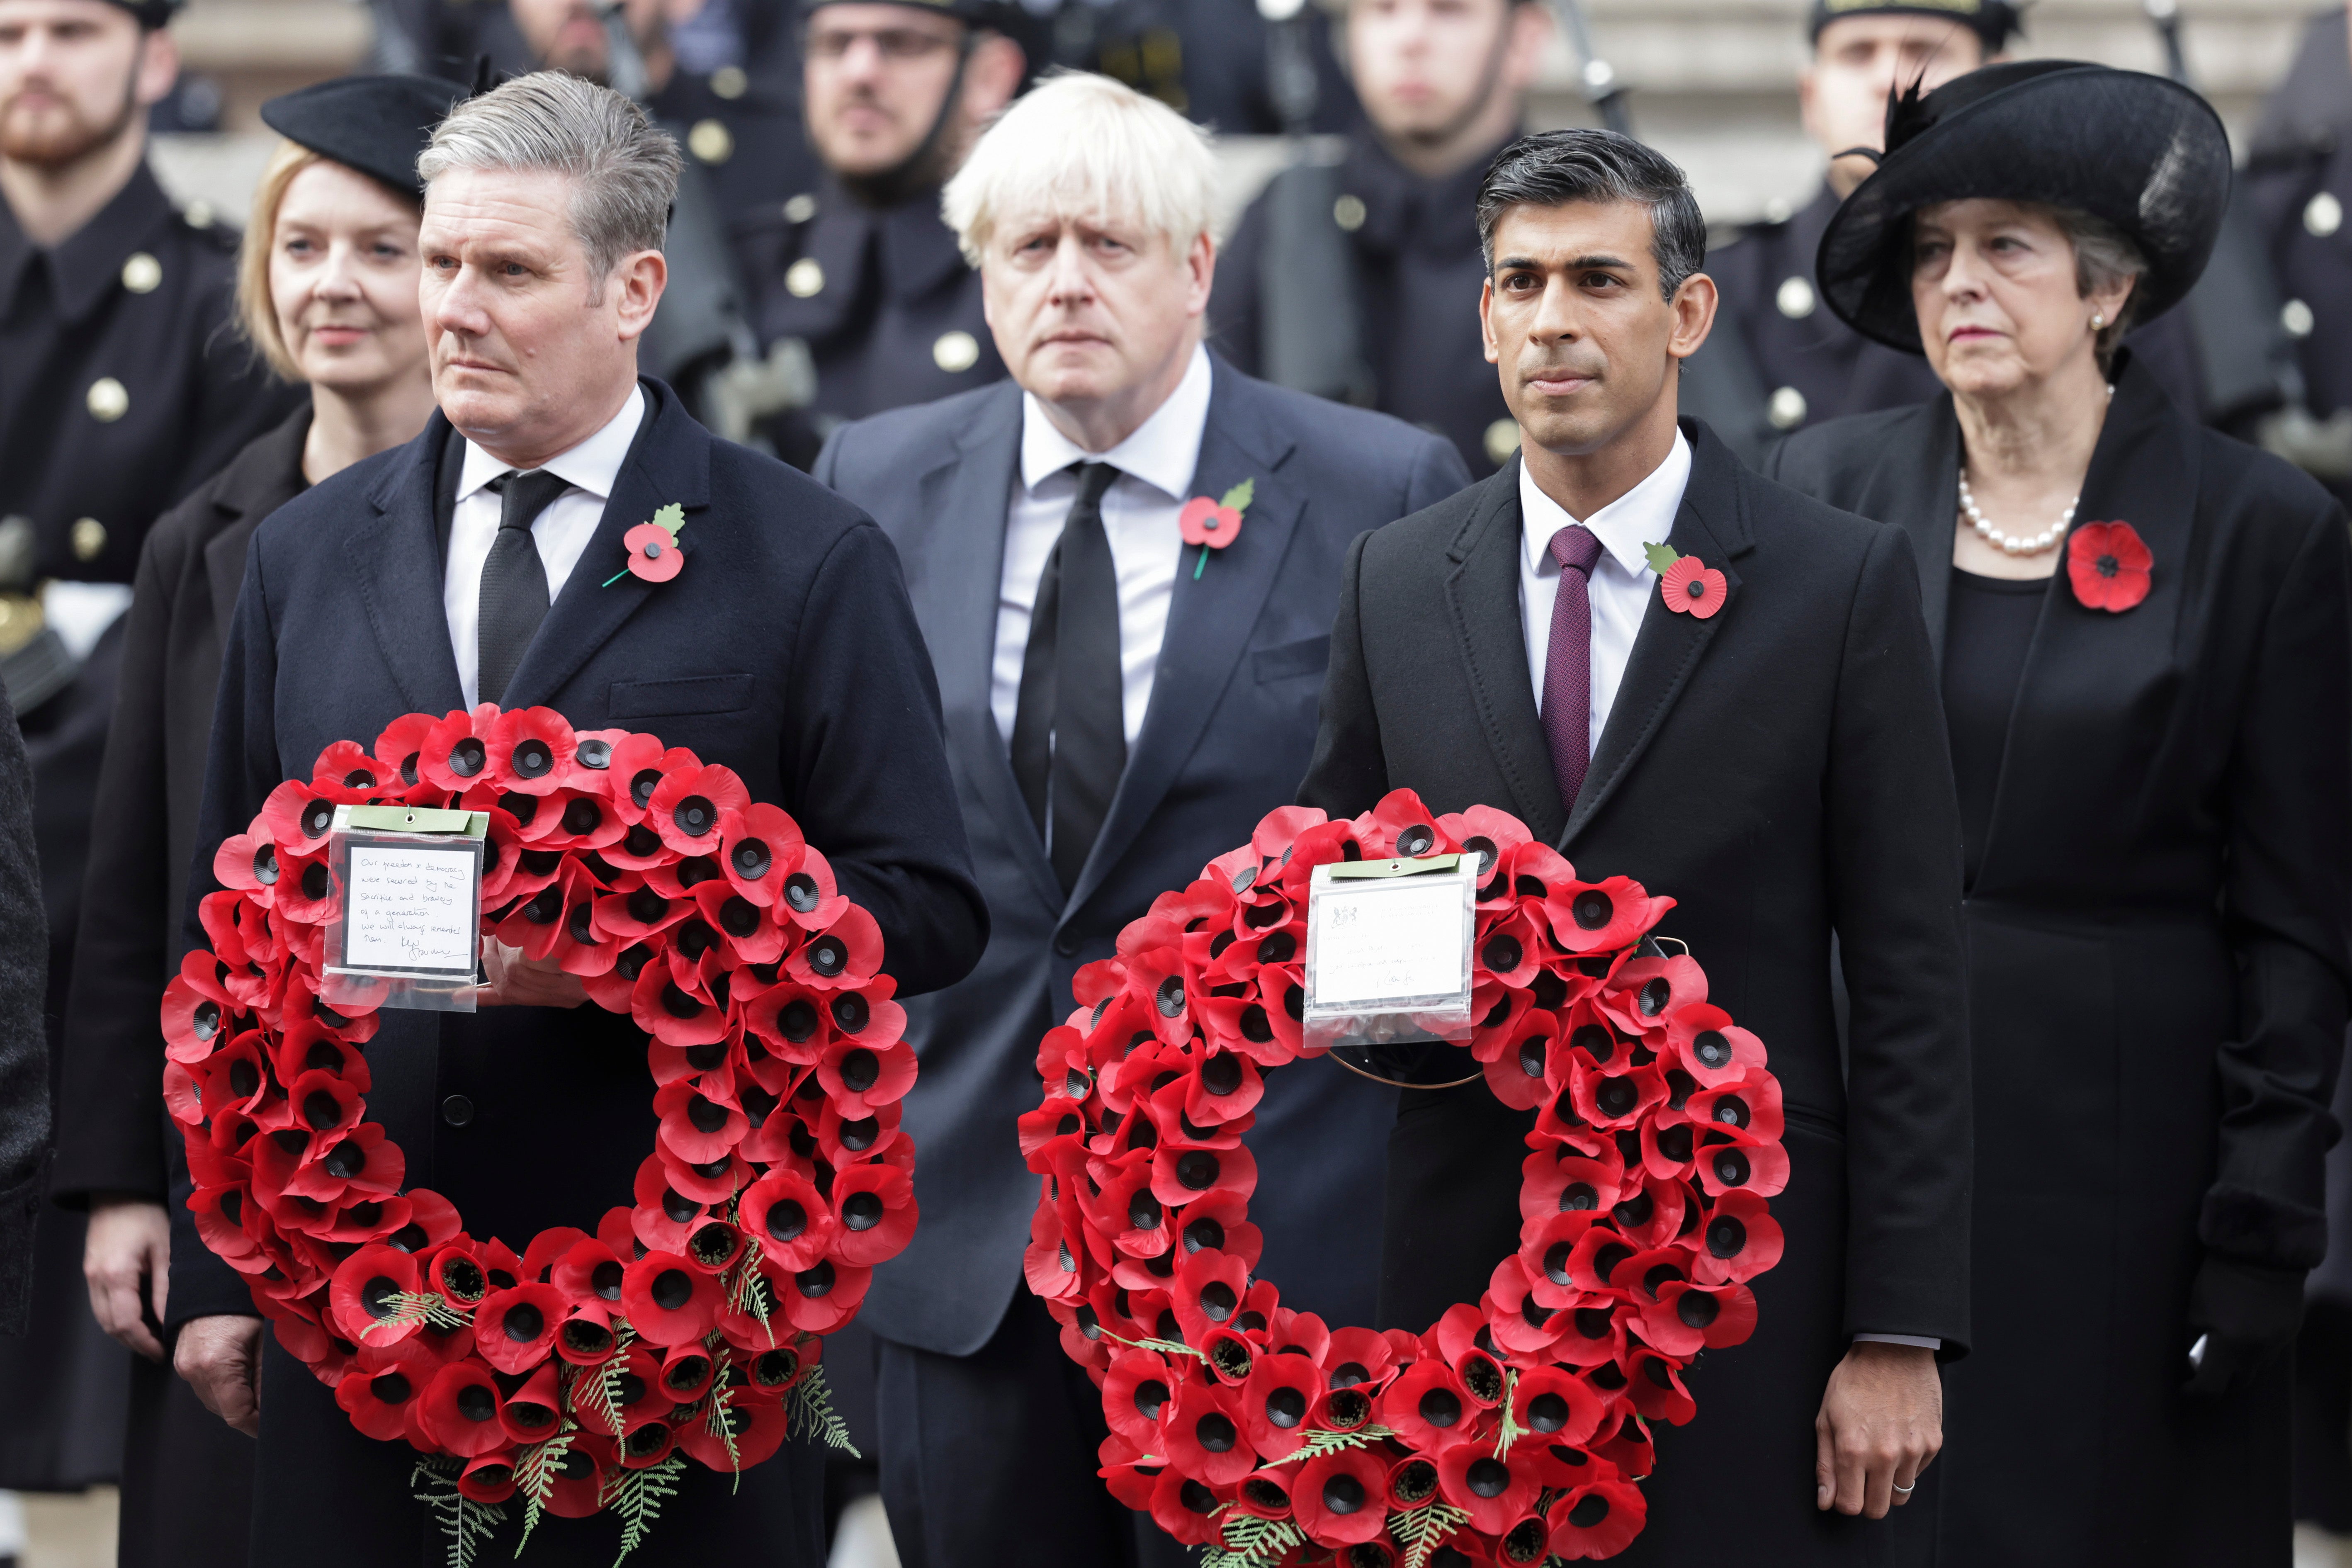 <p>Prime minister Rishi Sunak and Labour leader Keir Starmer at last year’s National Service Of Remembrance at The Cenotaph on Remembrance Sunday</p>